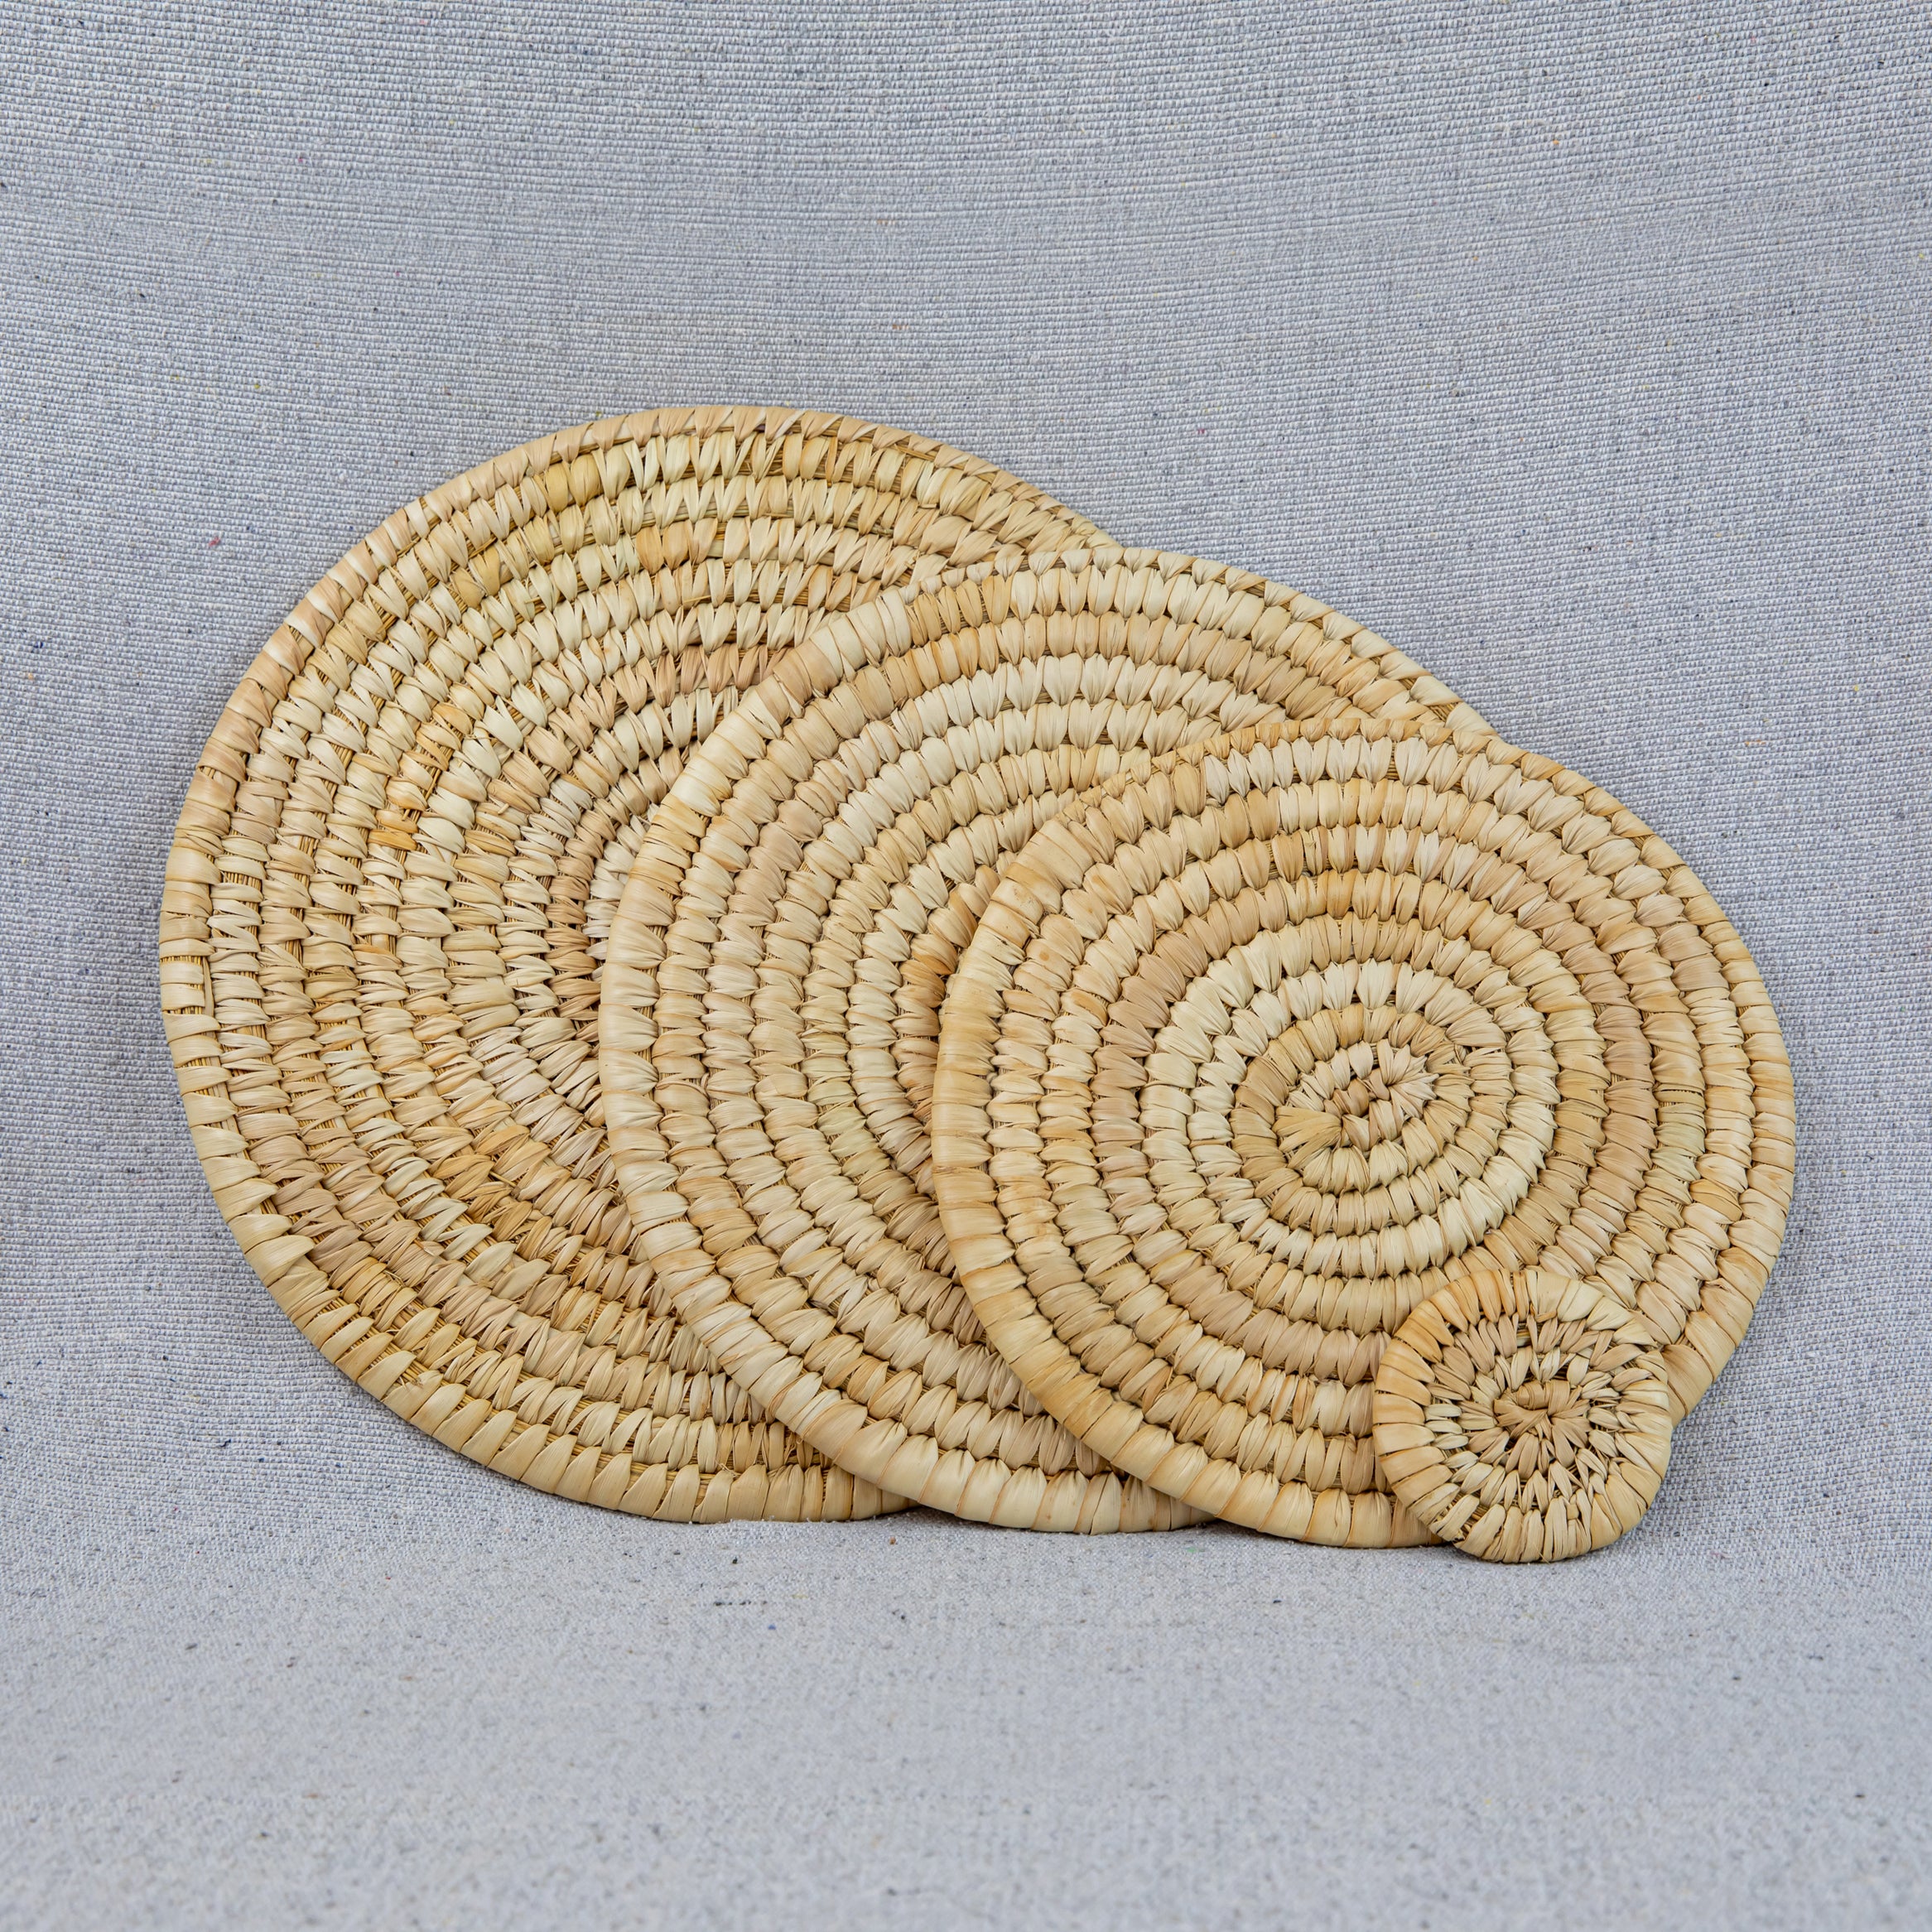 Woven Place Mats and Coaster